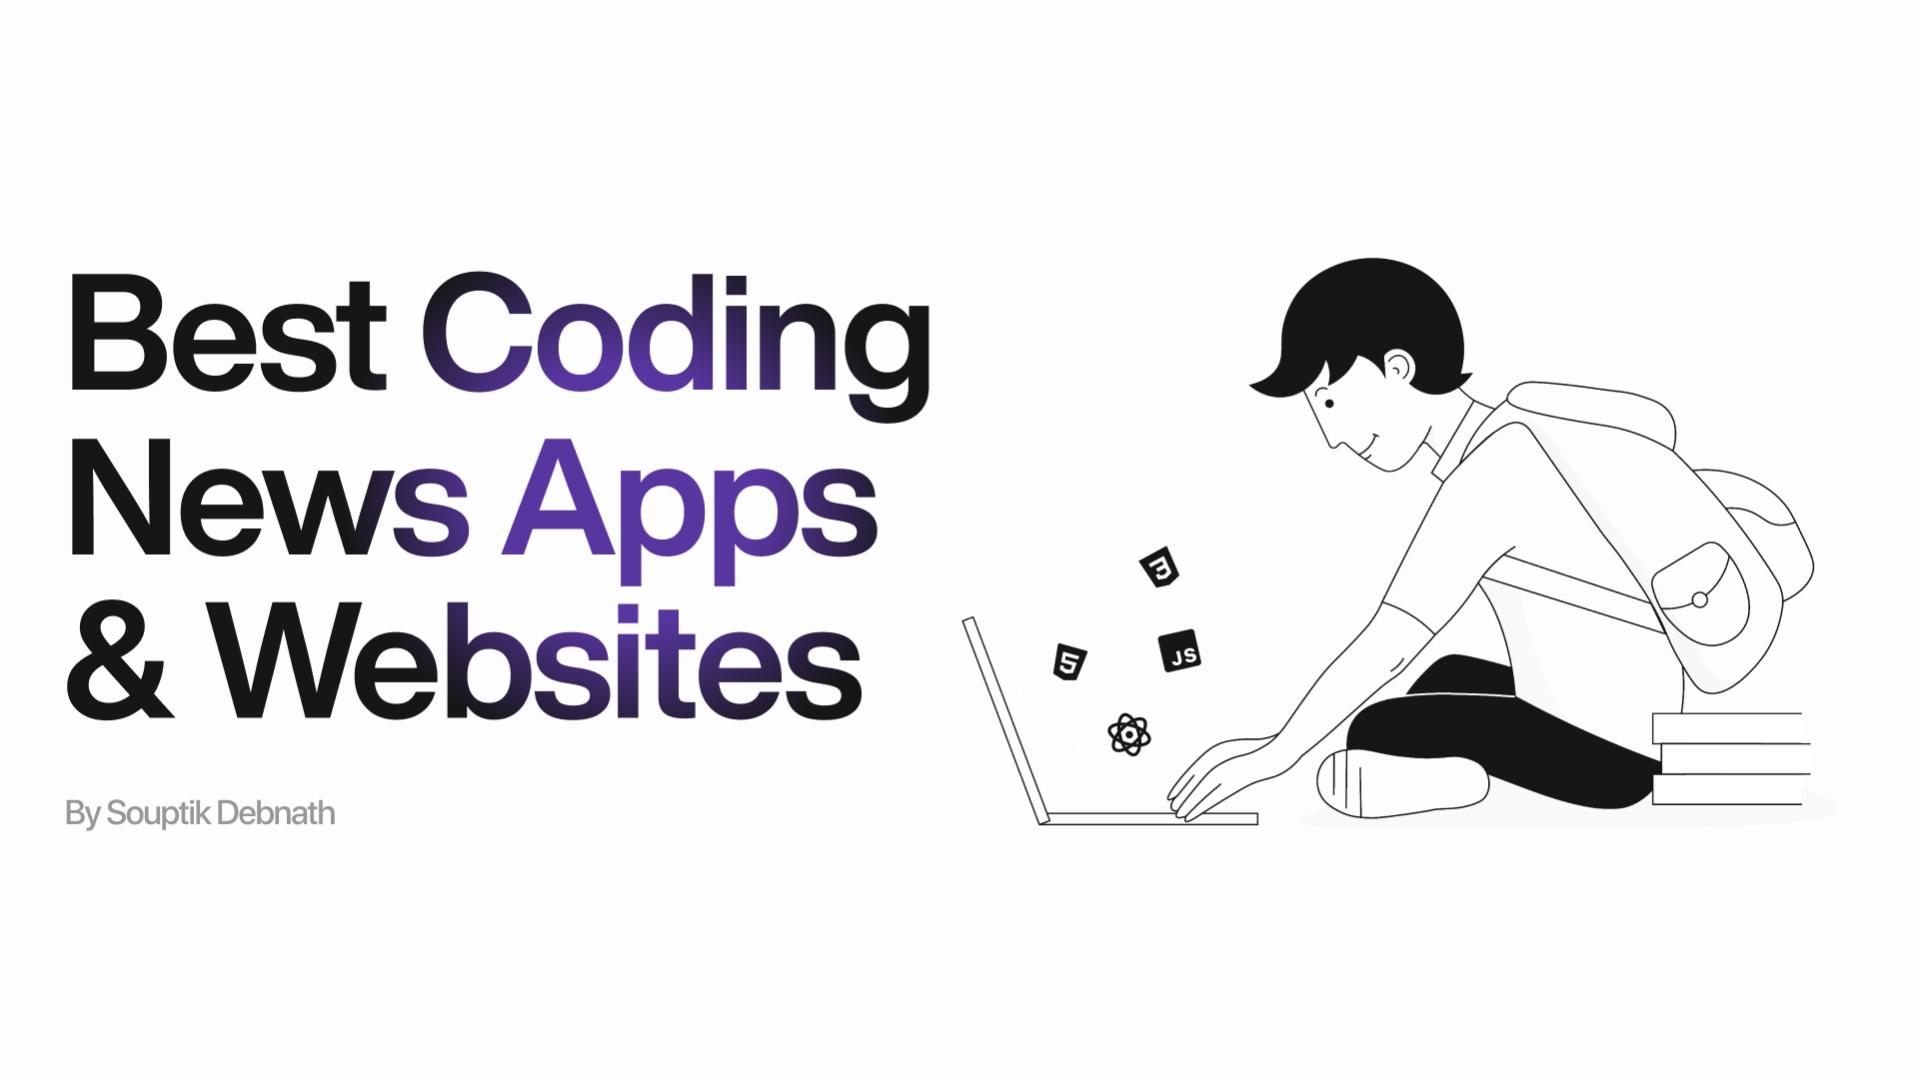 10 Best Coding News Apps And Websites